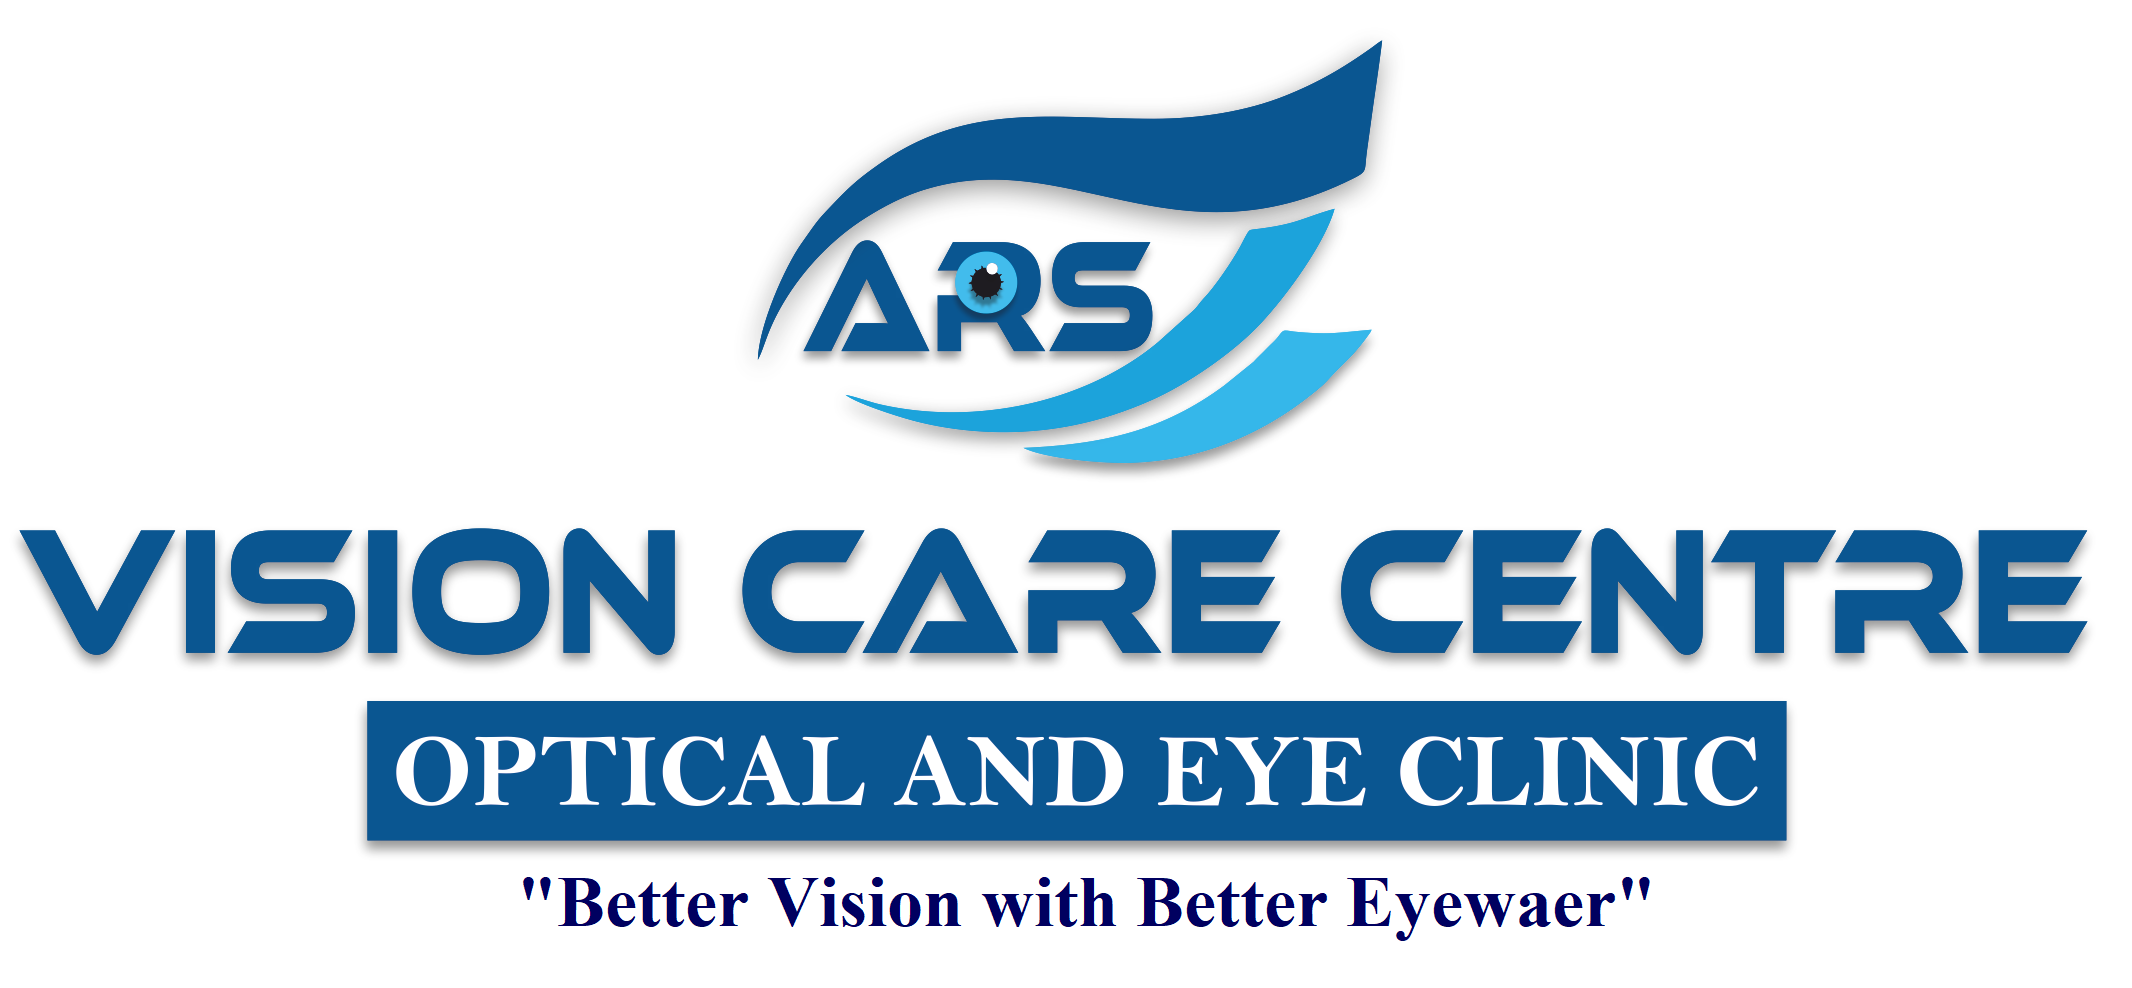 ARS Vision Care Centre|Hospitals|Medical Services